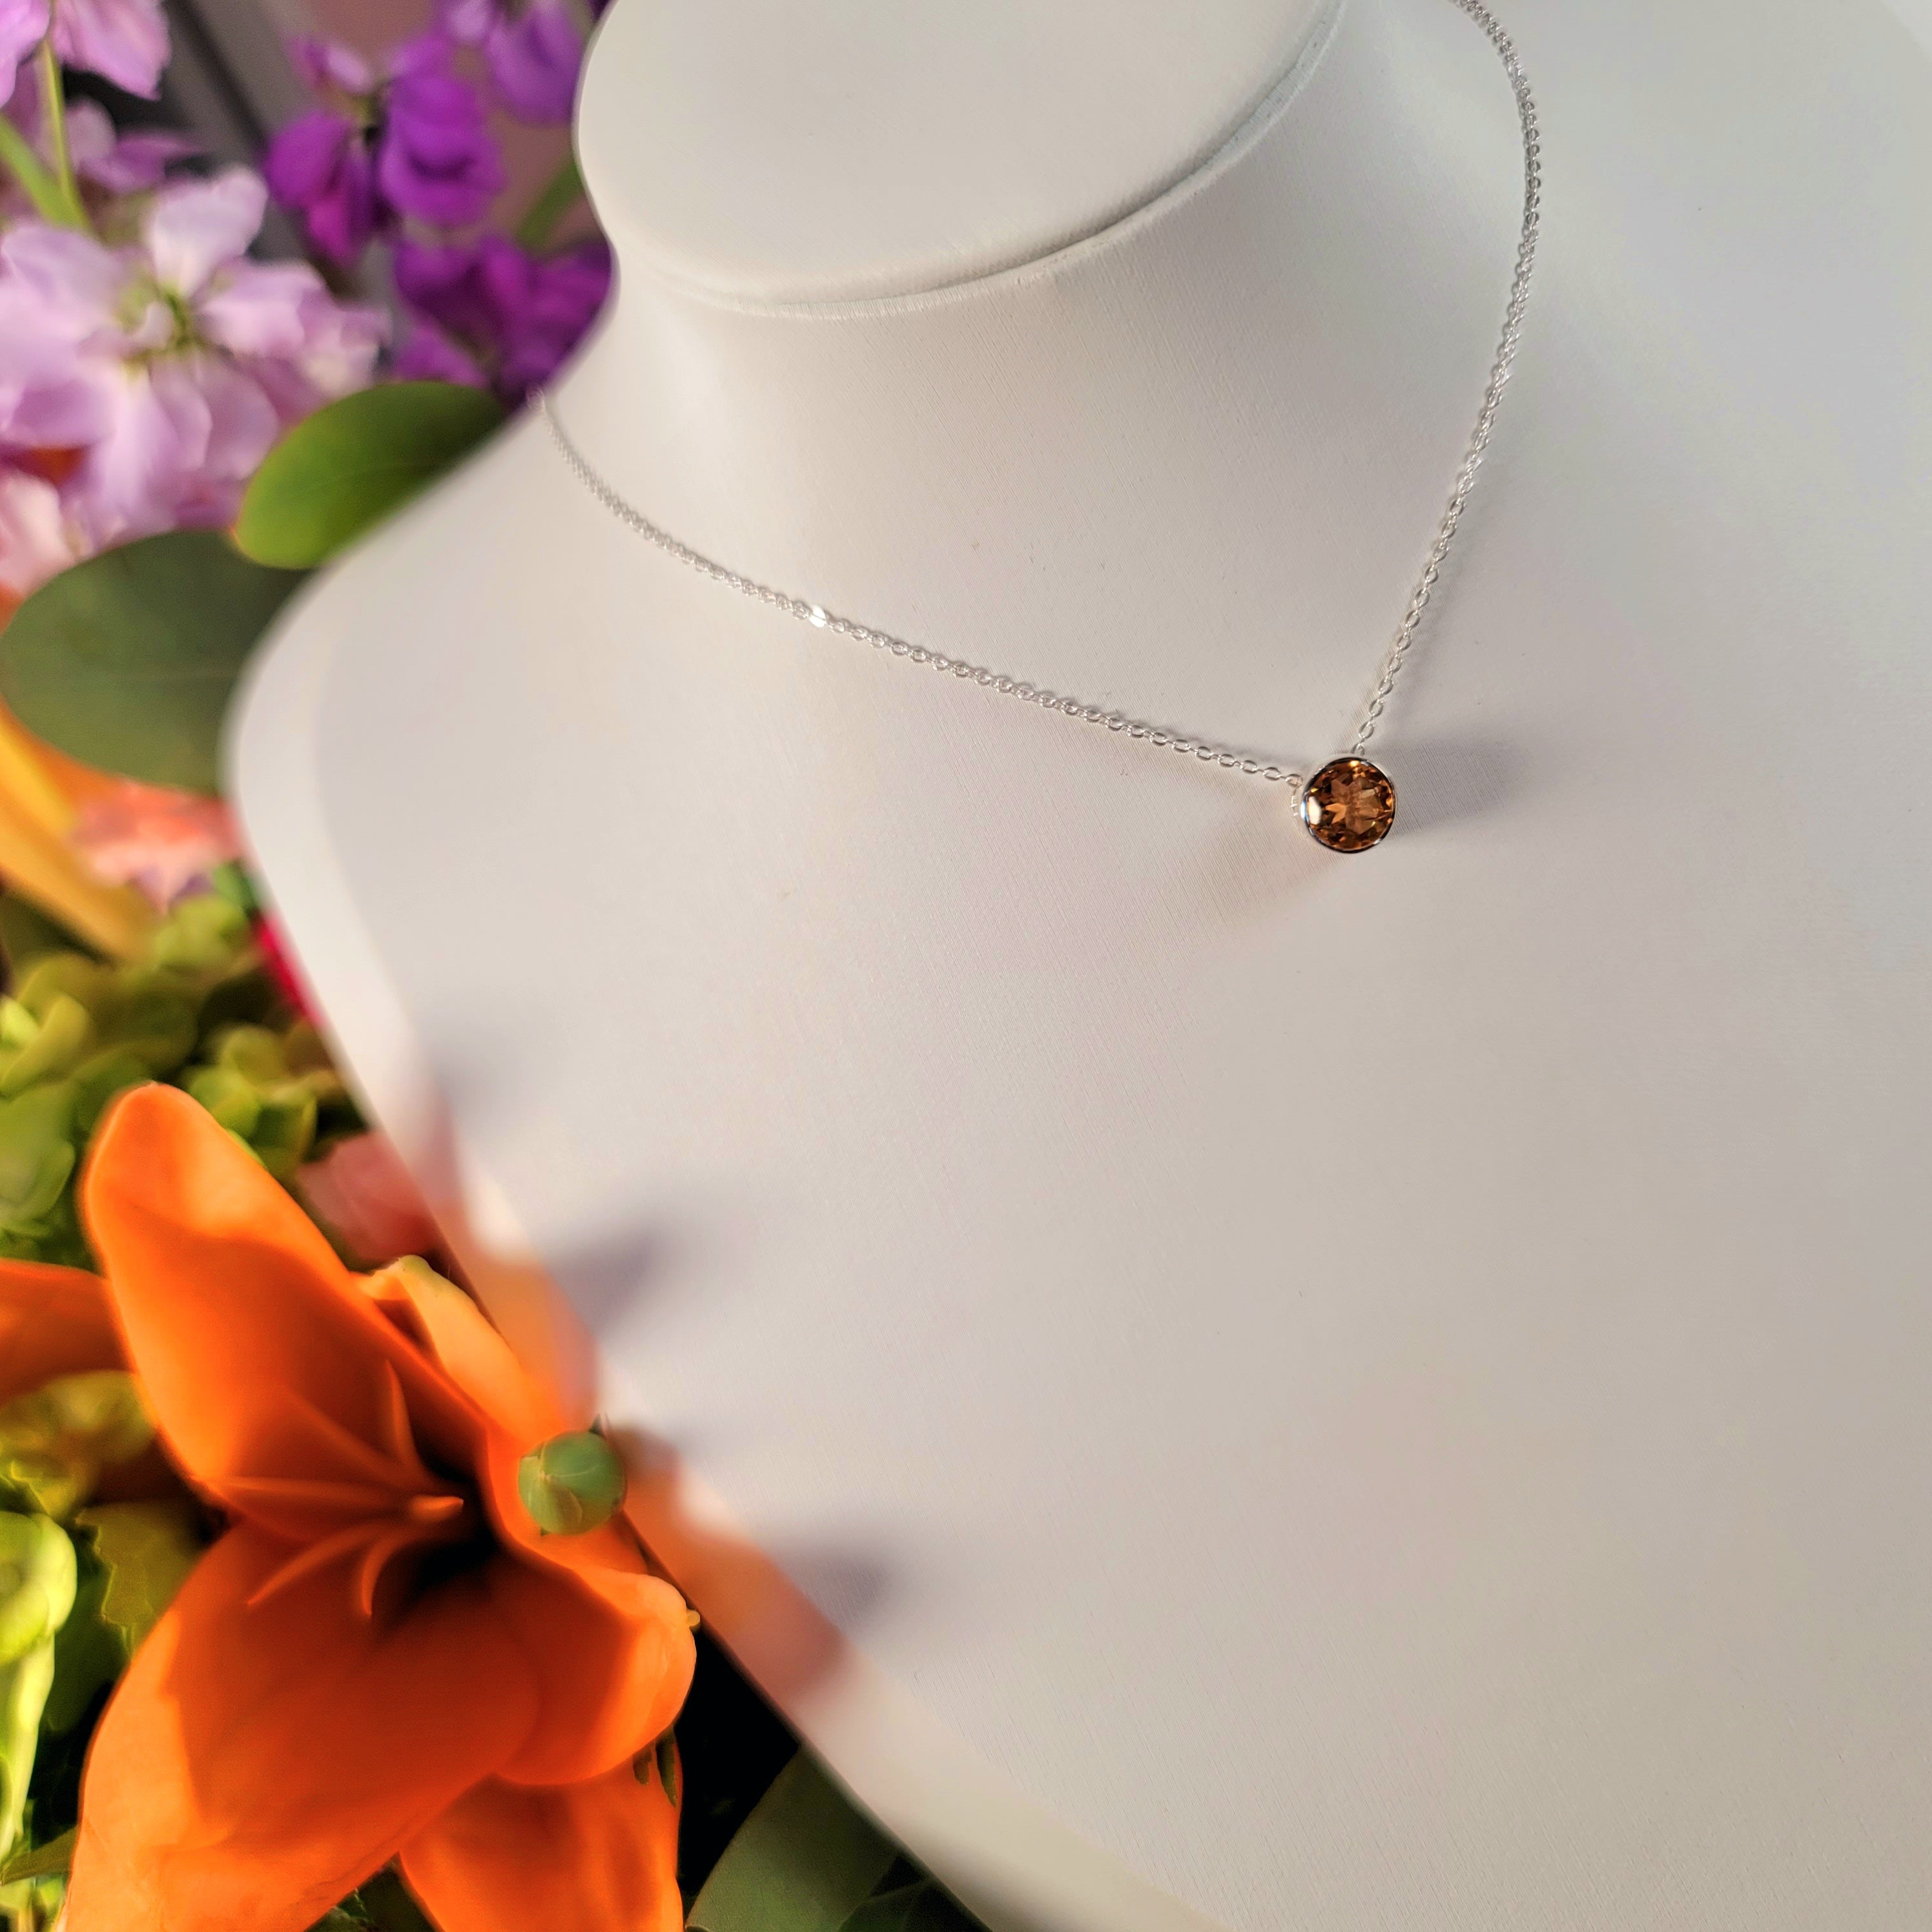 Citrine Necklace .925 Silver for Attracting Abundance and Positivity